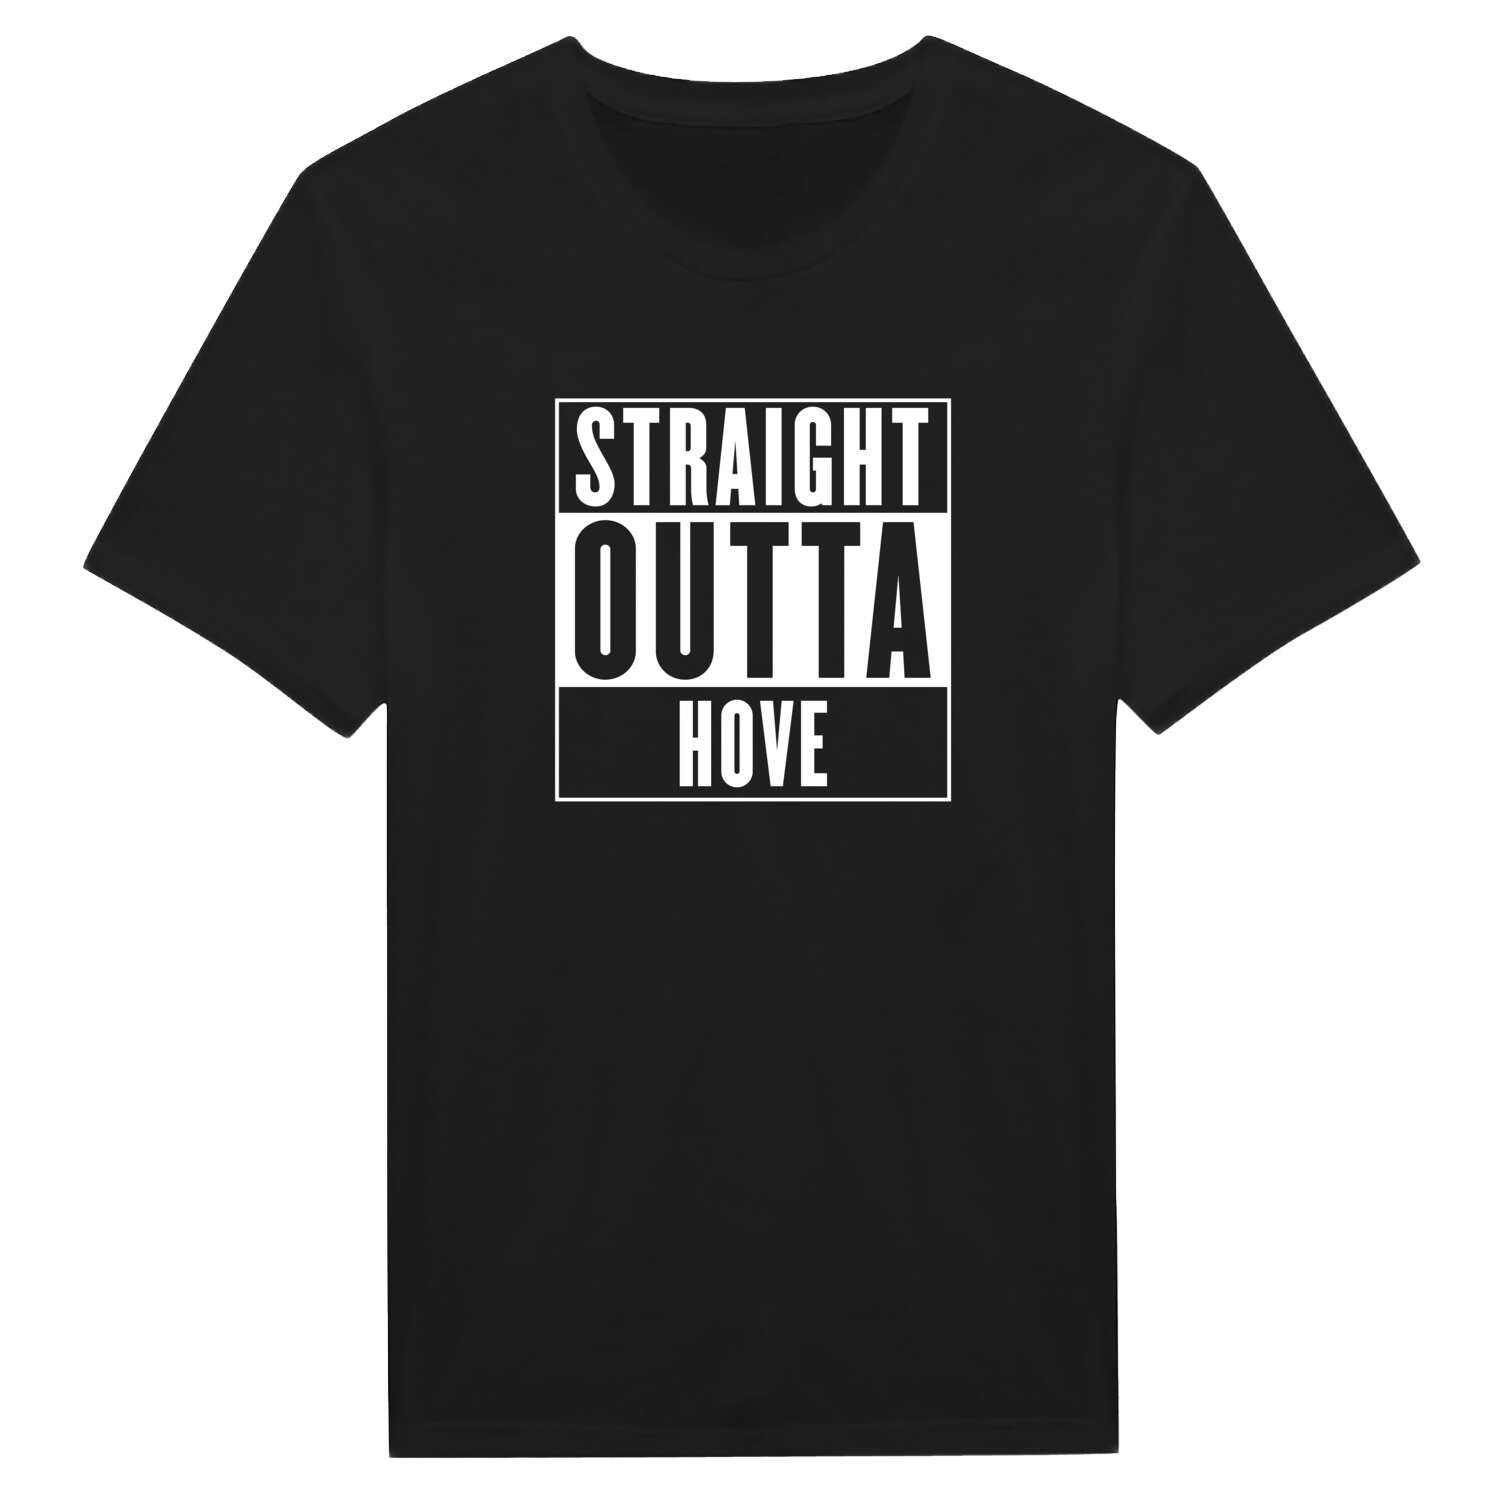 Hove T-Shirt »Straight Outta«